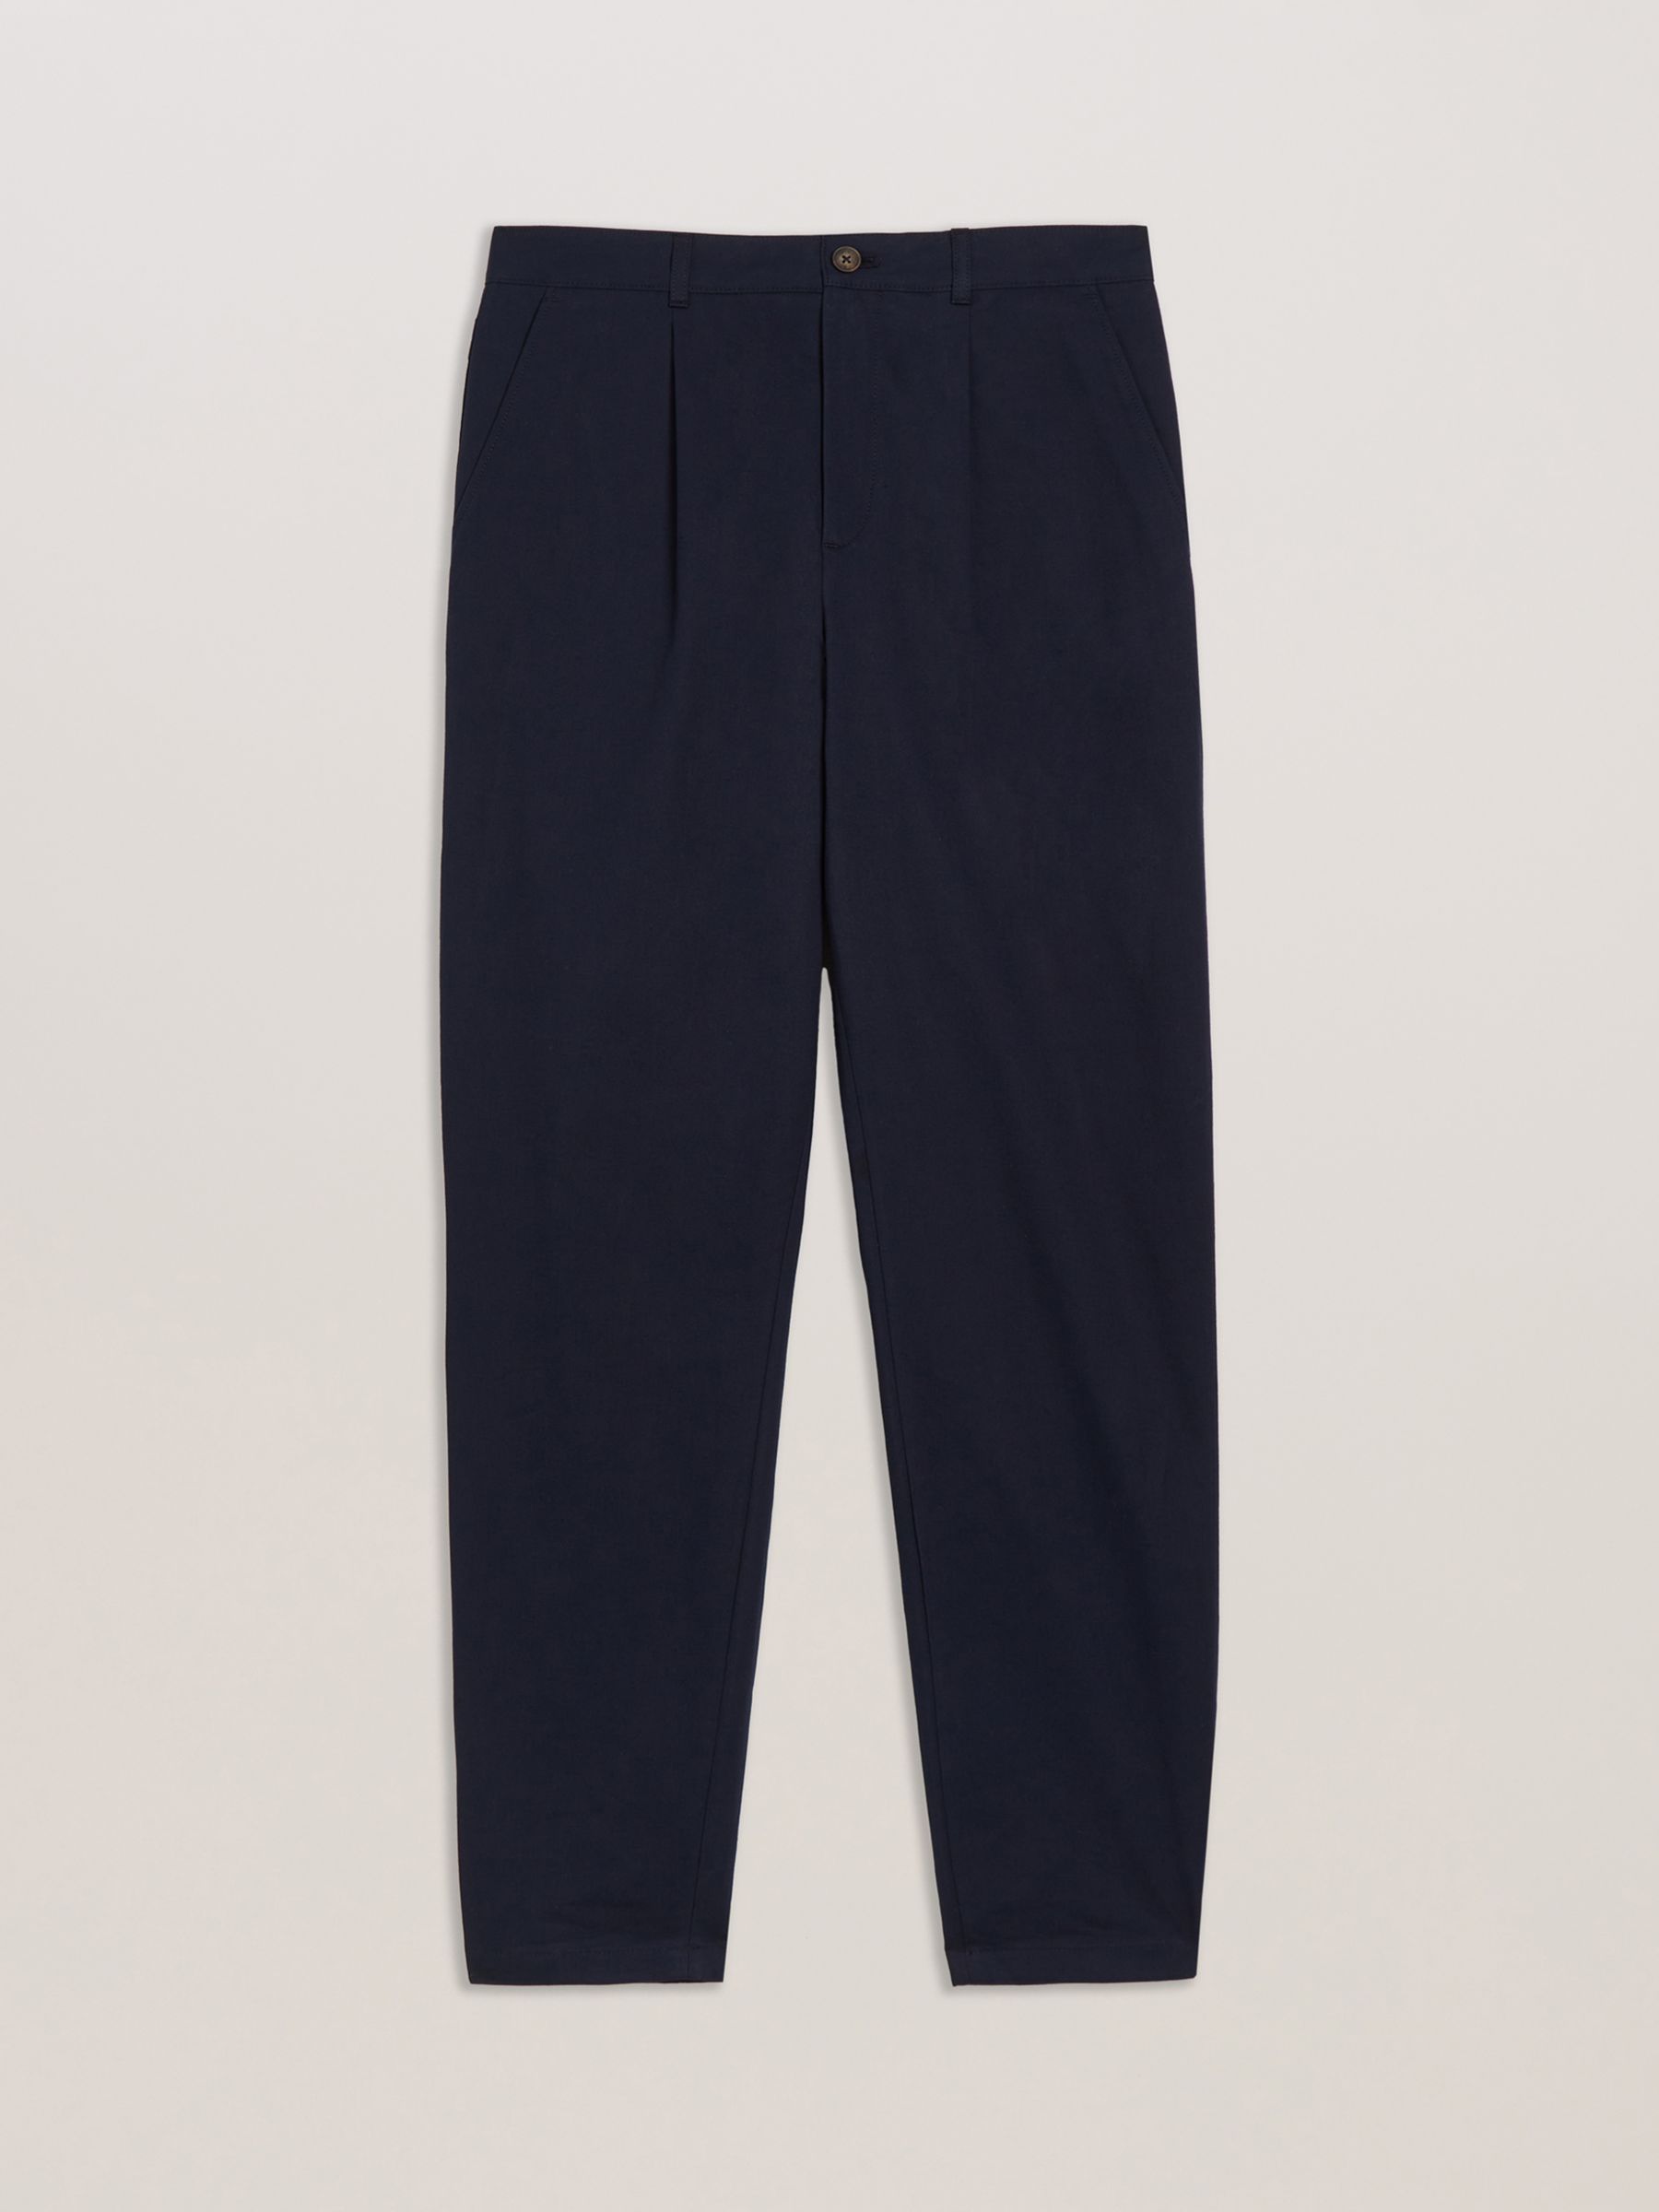 Ted Baker Holmer Linen Blend Chino Trousers, Navy, 28R